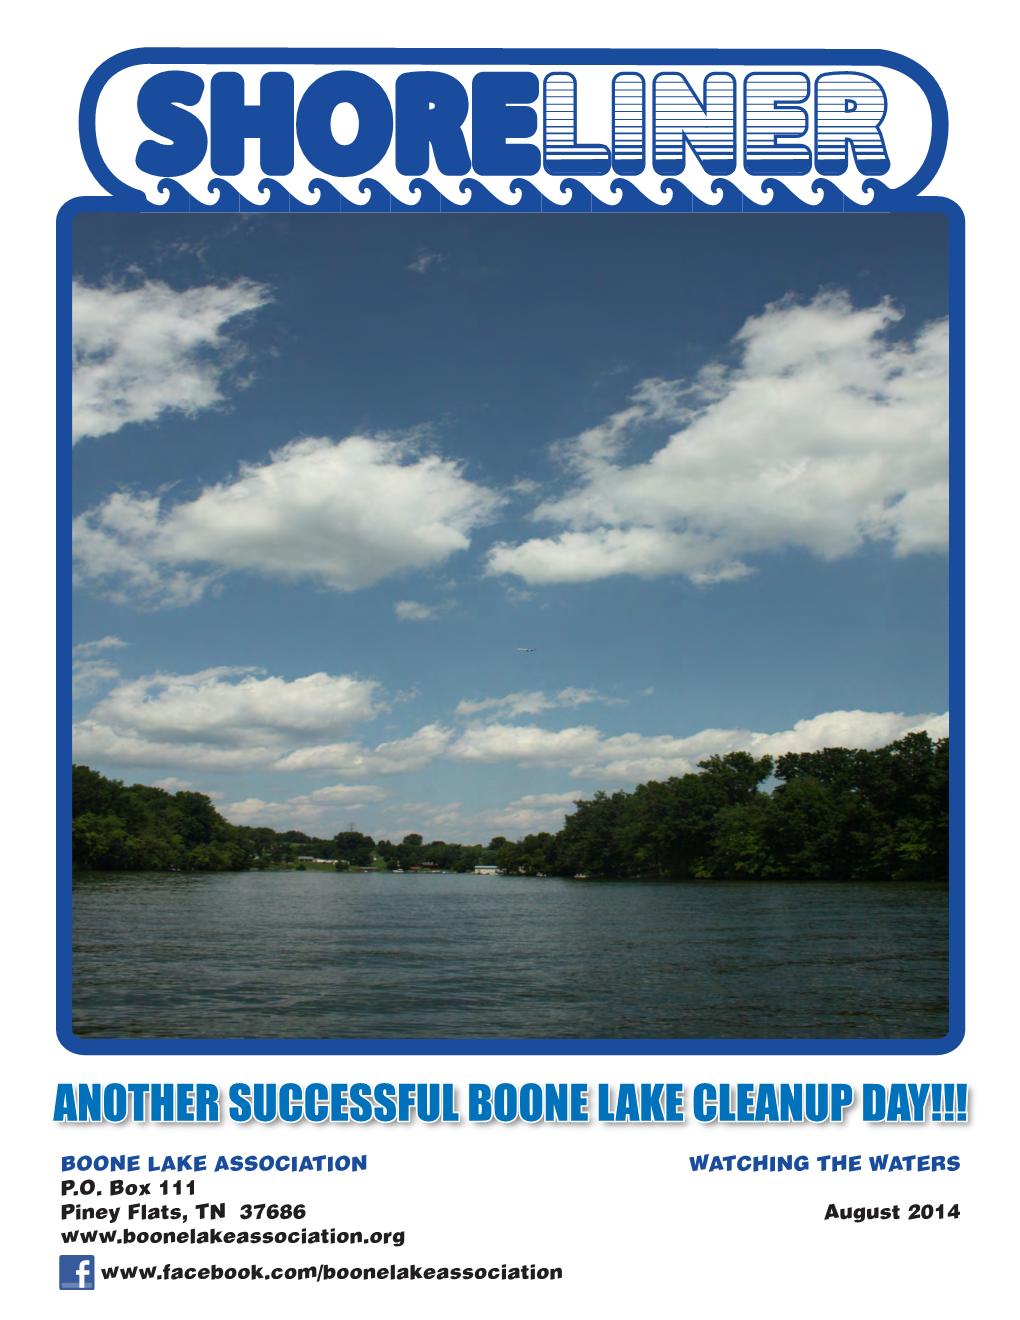 Another Successful Boone Lake Cleanup Day!!!